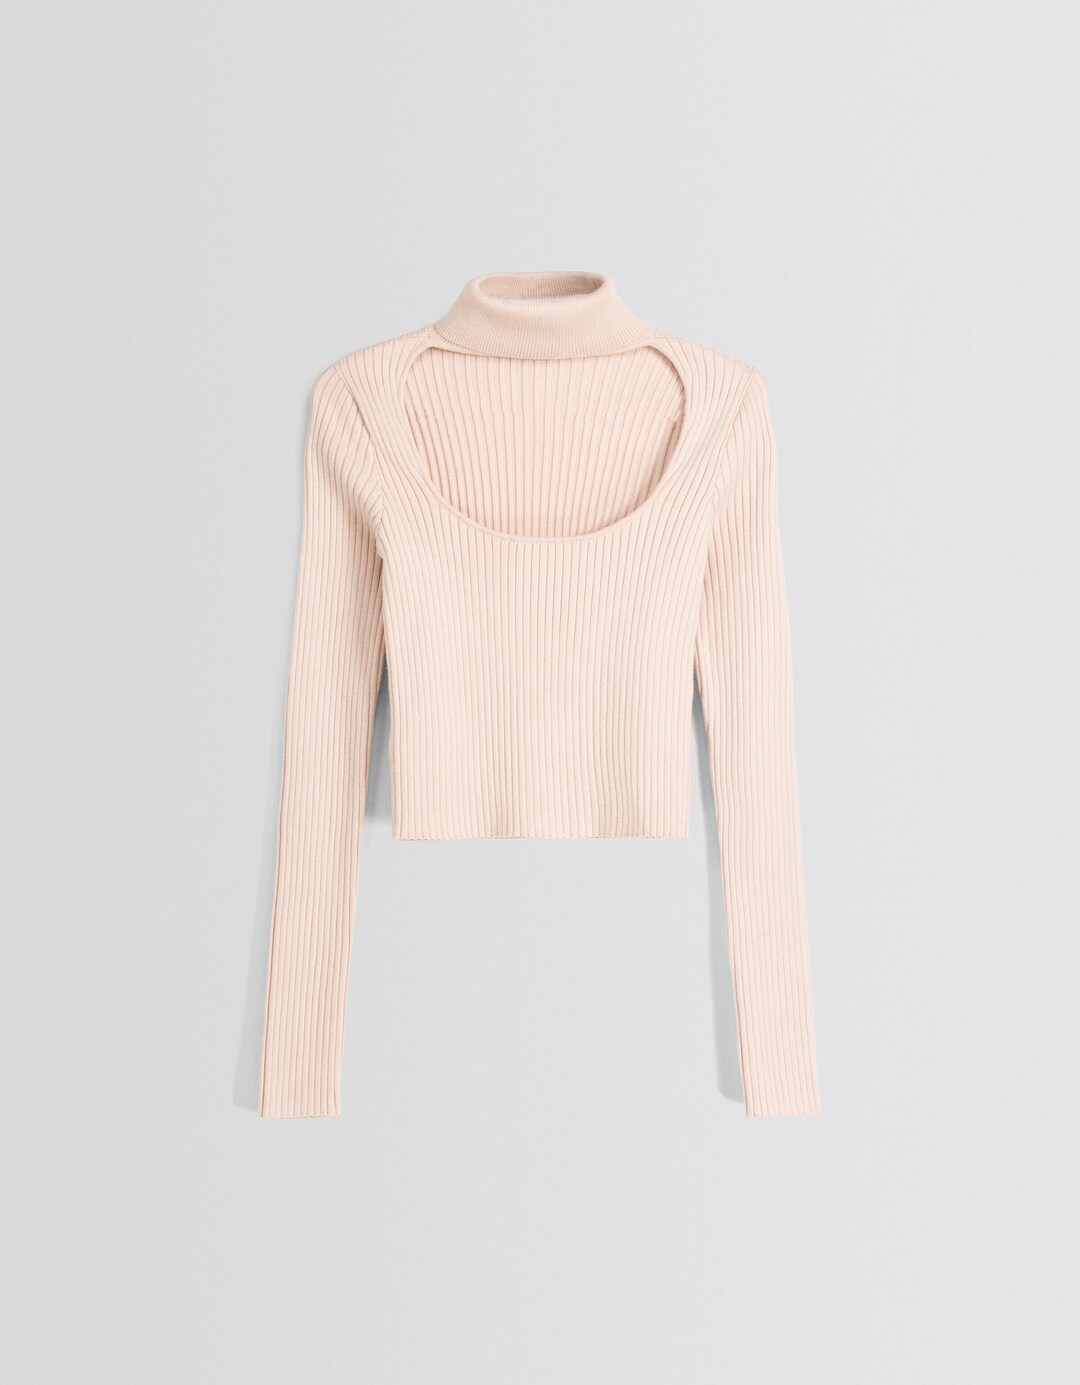 Sweater with choker neck